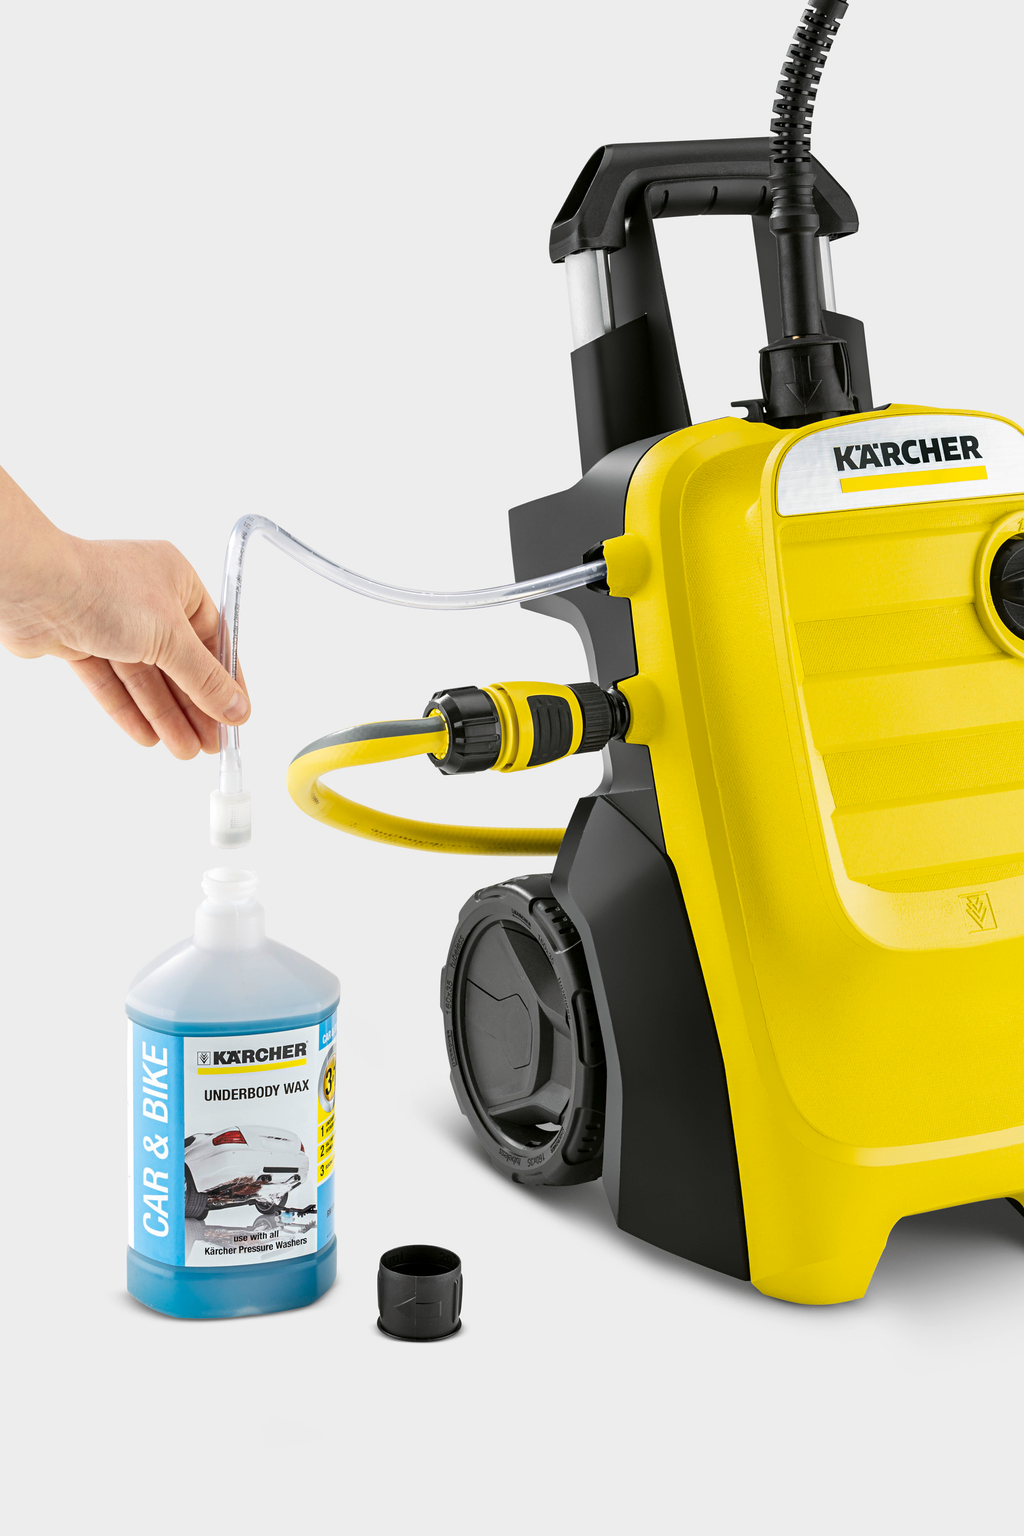 Rent this Kärcher compact, yet super powerful pressure washer used adding detergent now from BIYU!